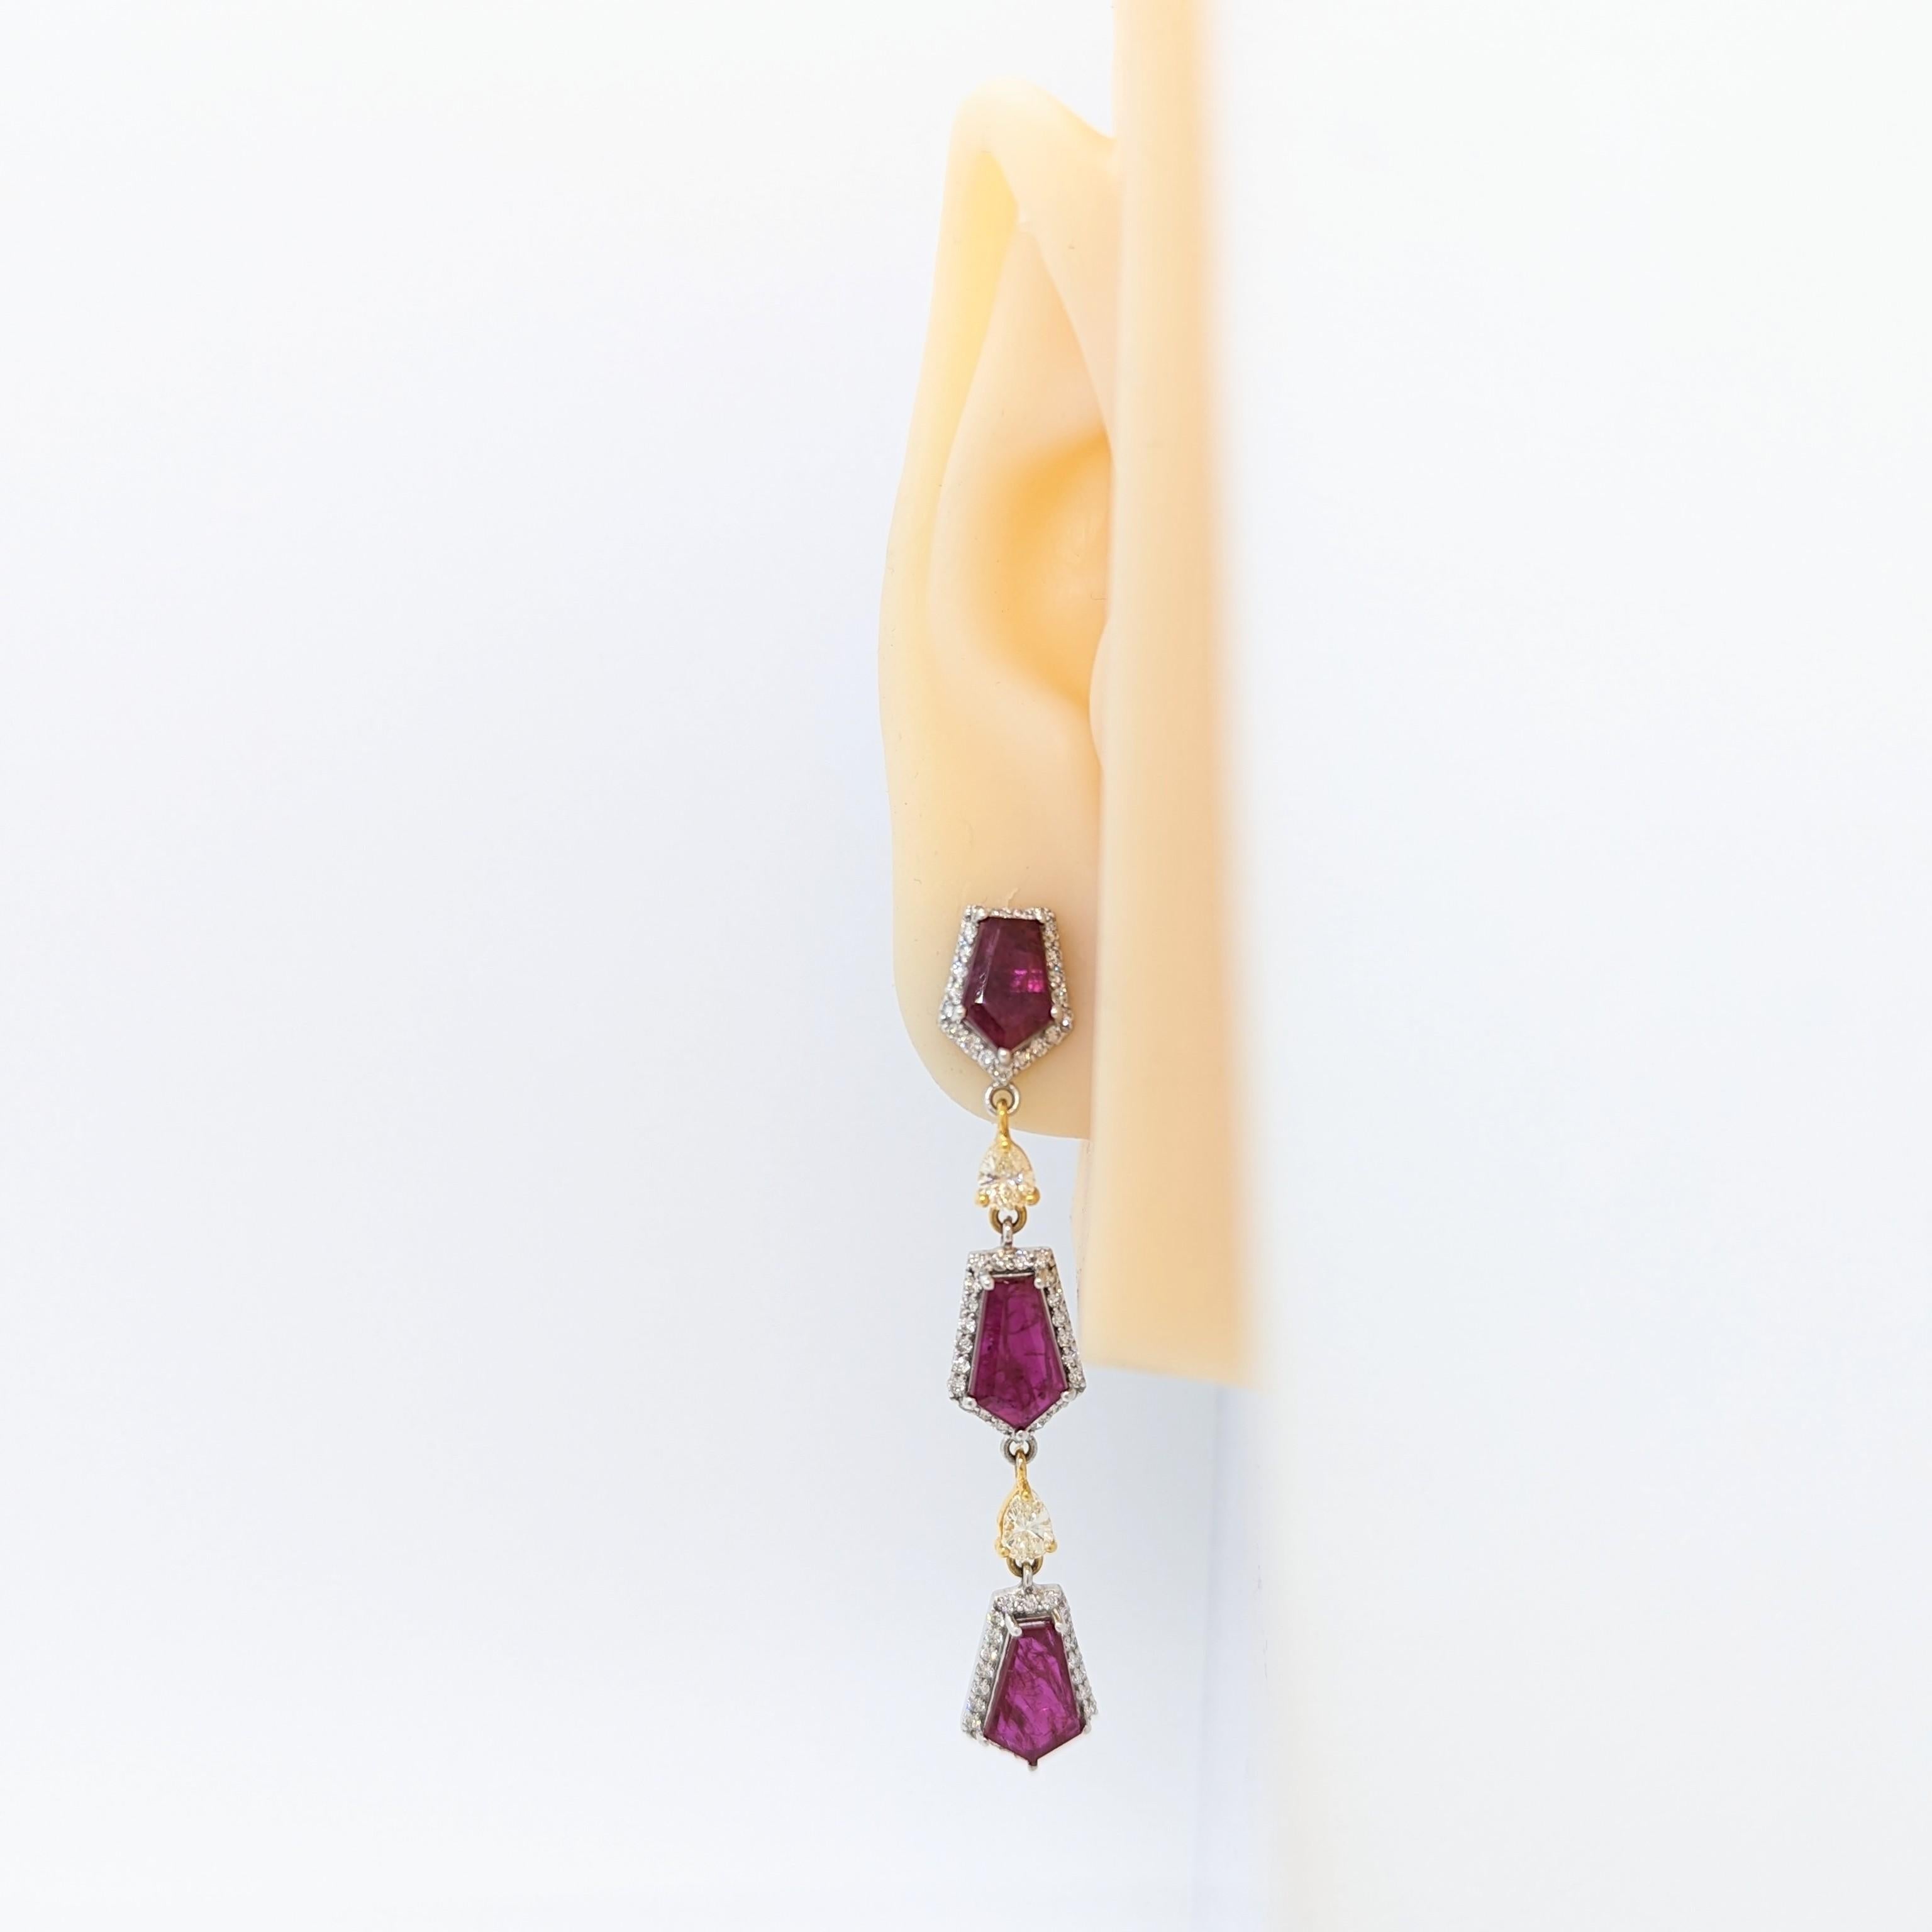 Stunning dangle earrings with GIA certified unheated 8.40 ct. purplish red ruby kit shapes with 2.00 ct. good quality, white, and bright diamond rounds.  Handmade in 18k white and yellow gold.  GIA certificate included.